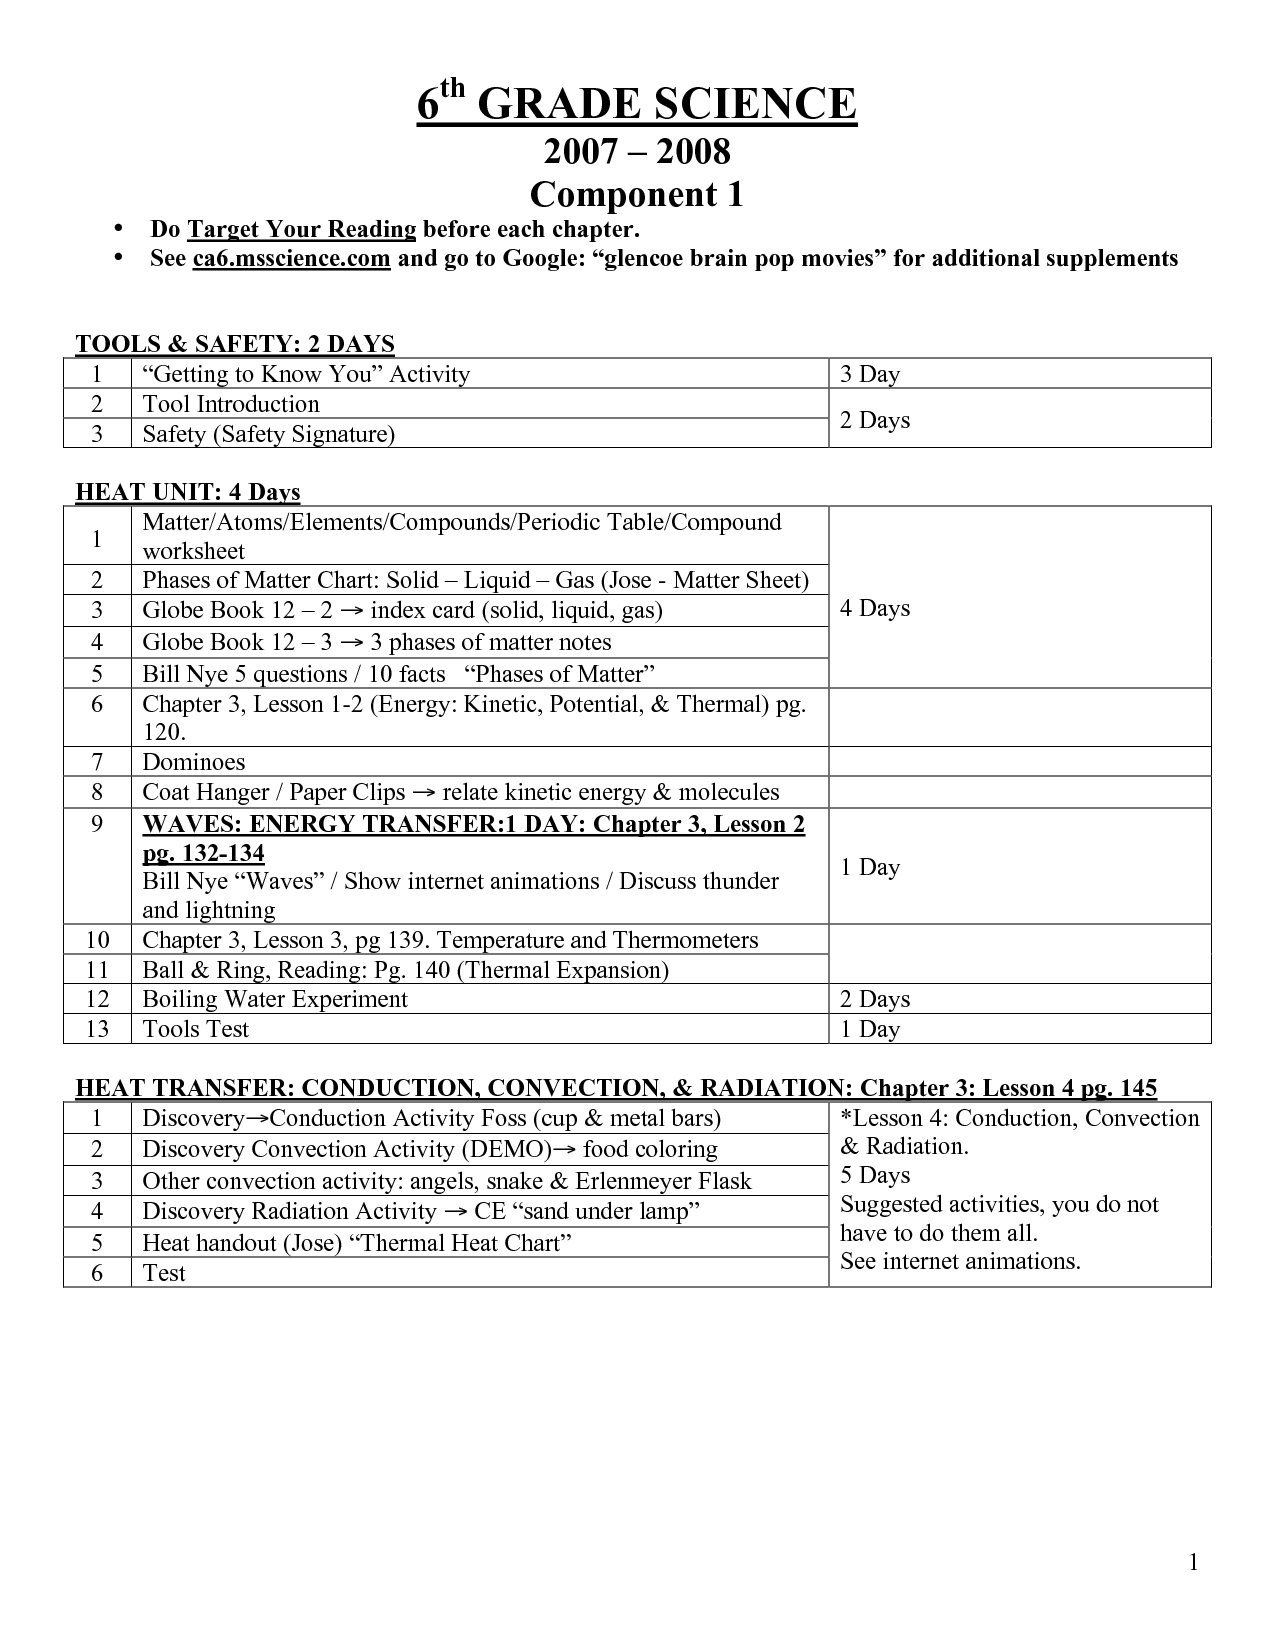 10-best-images-of-6-grade-science-worksheets-6th-grade-science